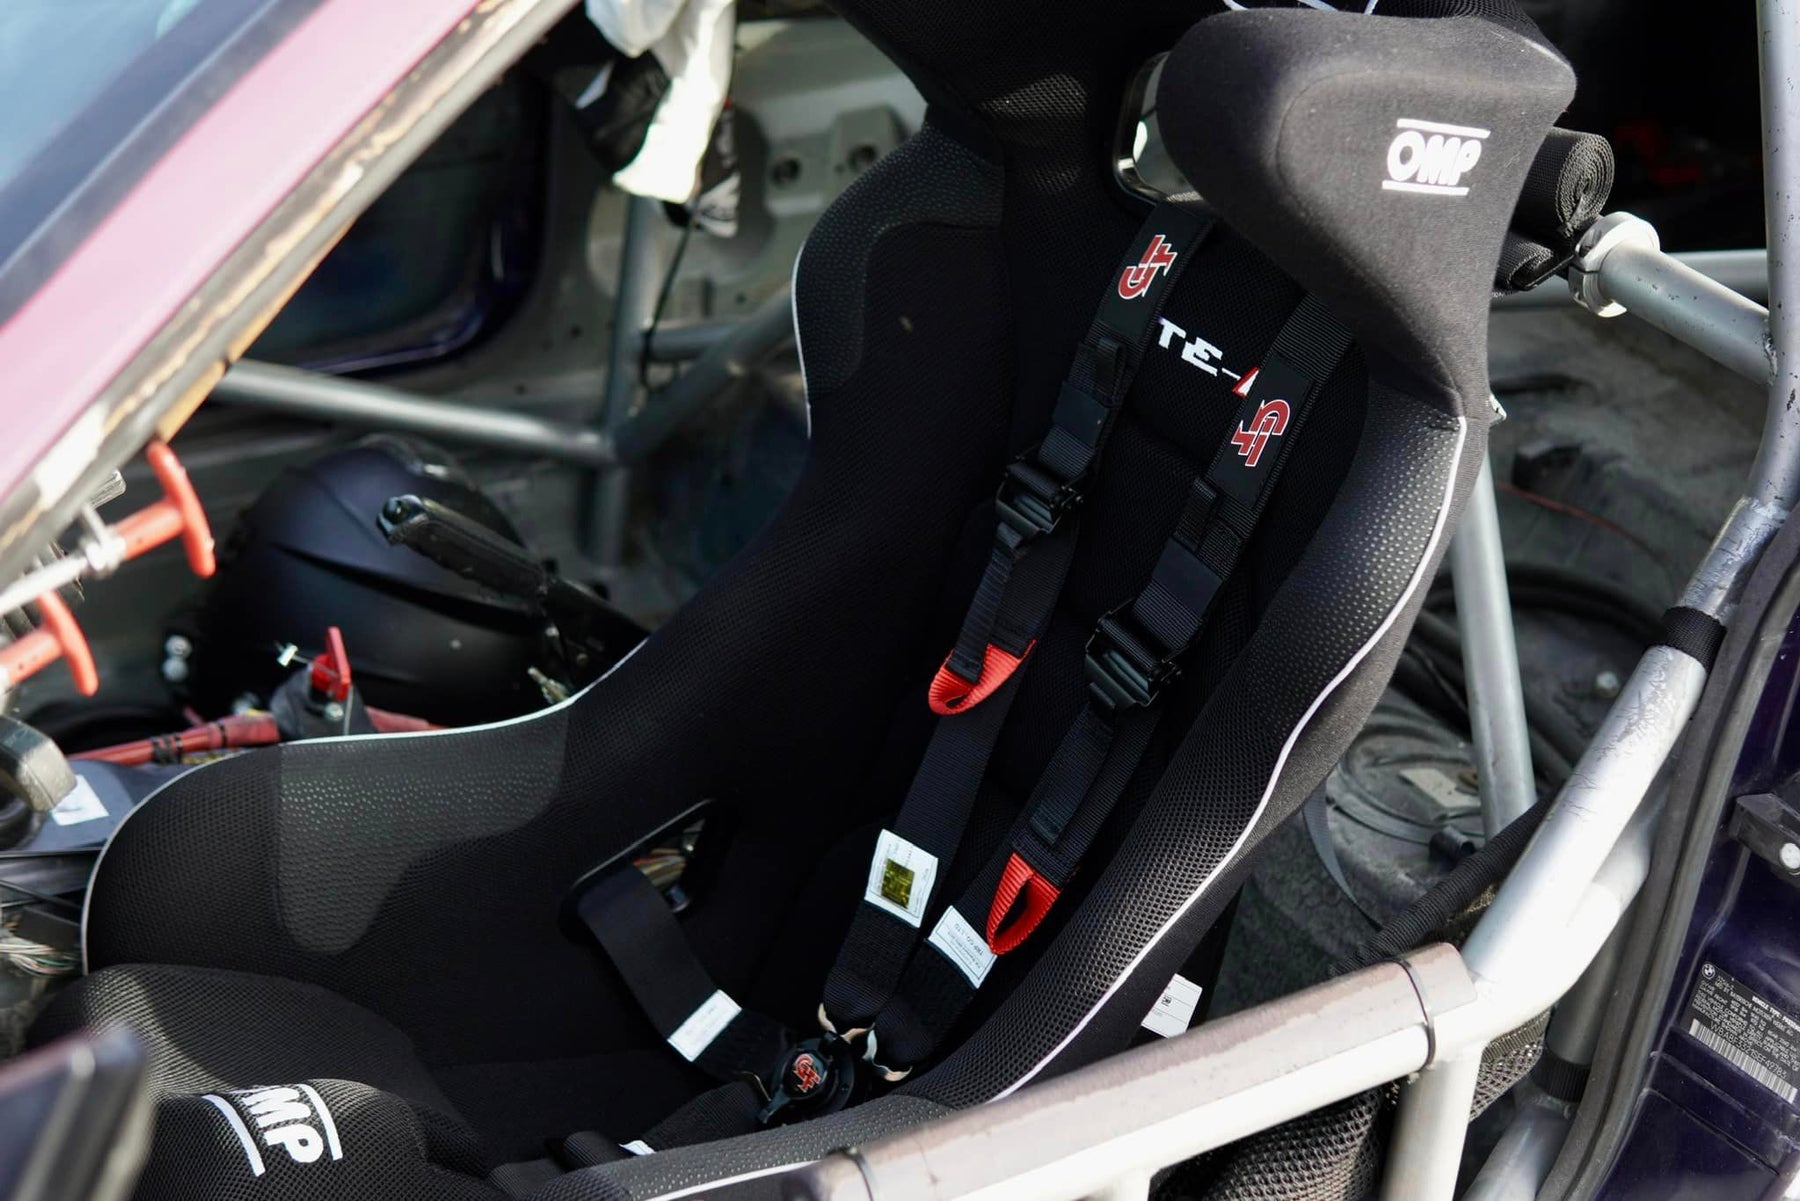 OMP Racing Seat And Racing Harness Cockpit View - Fast Racer